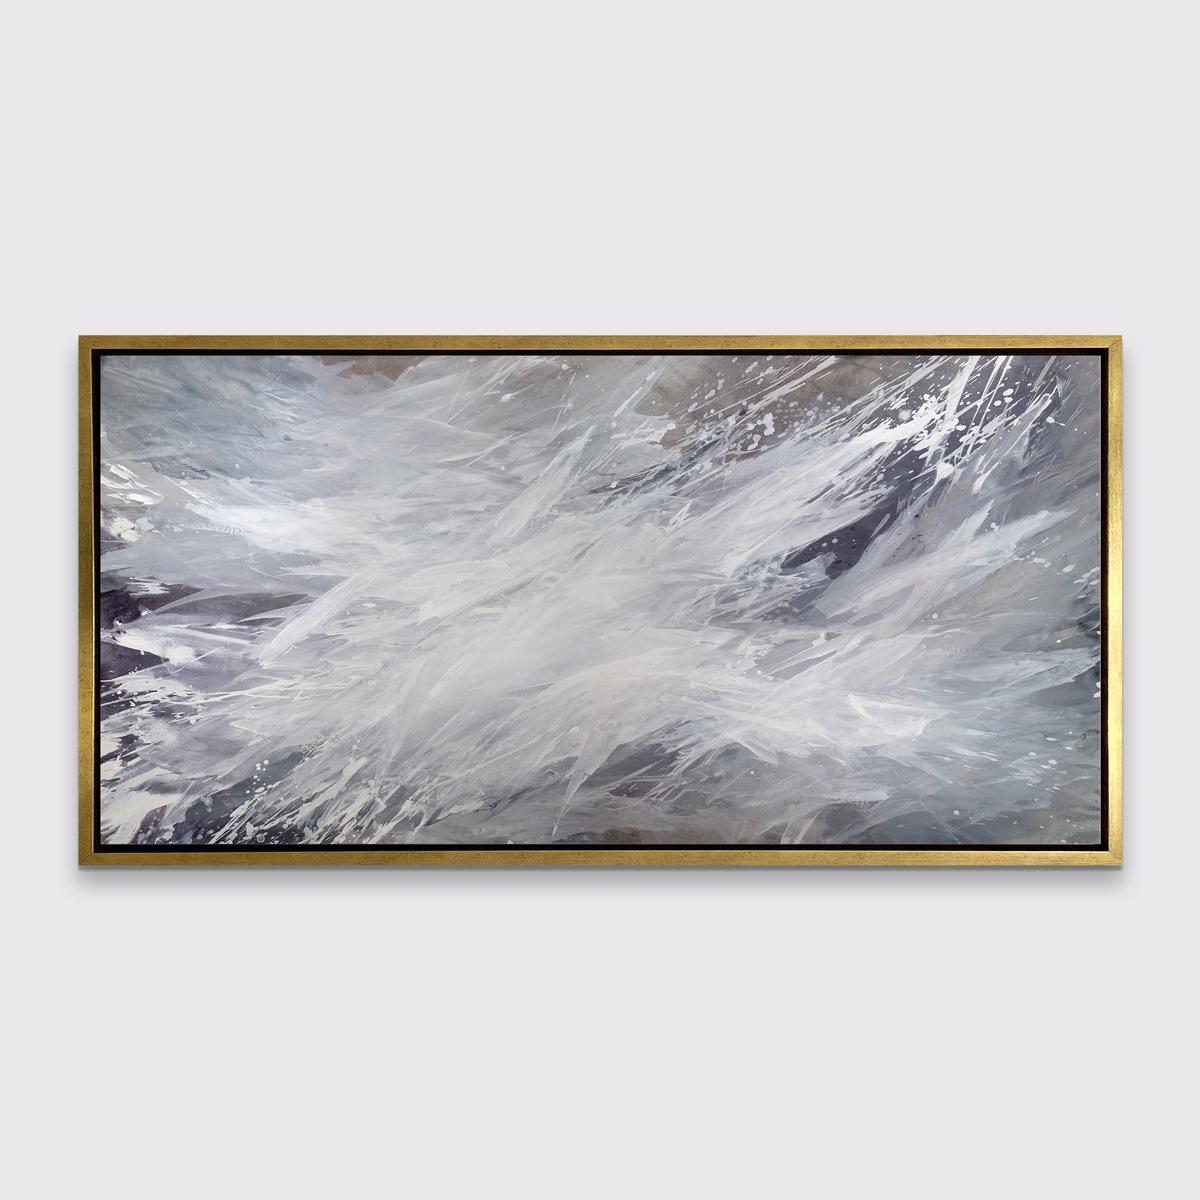 This abstract limited edition print by Teodora Guererra features splashes of white layered over earth tones and grey to create energetic movement that moves outward toward the edges of the composition. 

This Limited Edition giclee print by Teodora